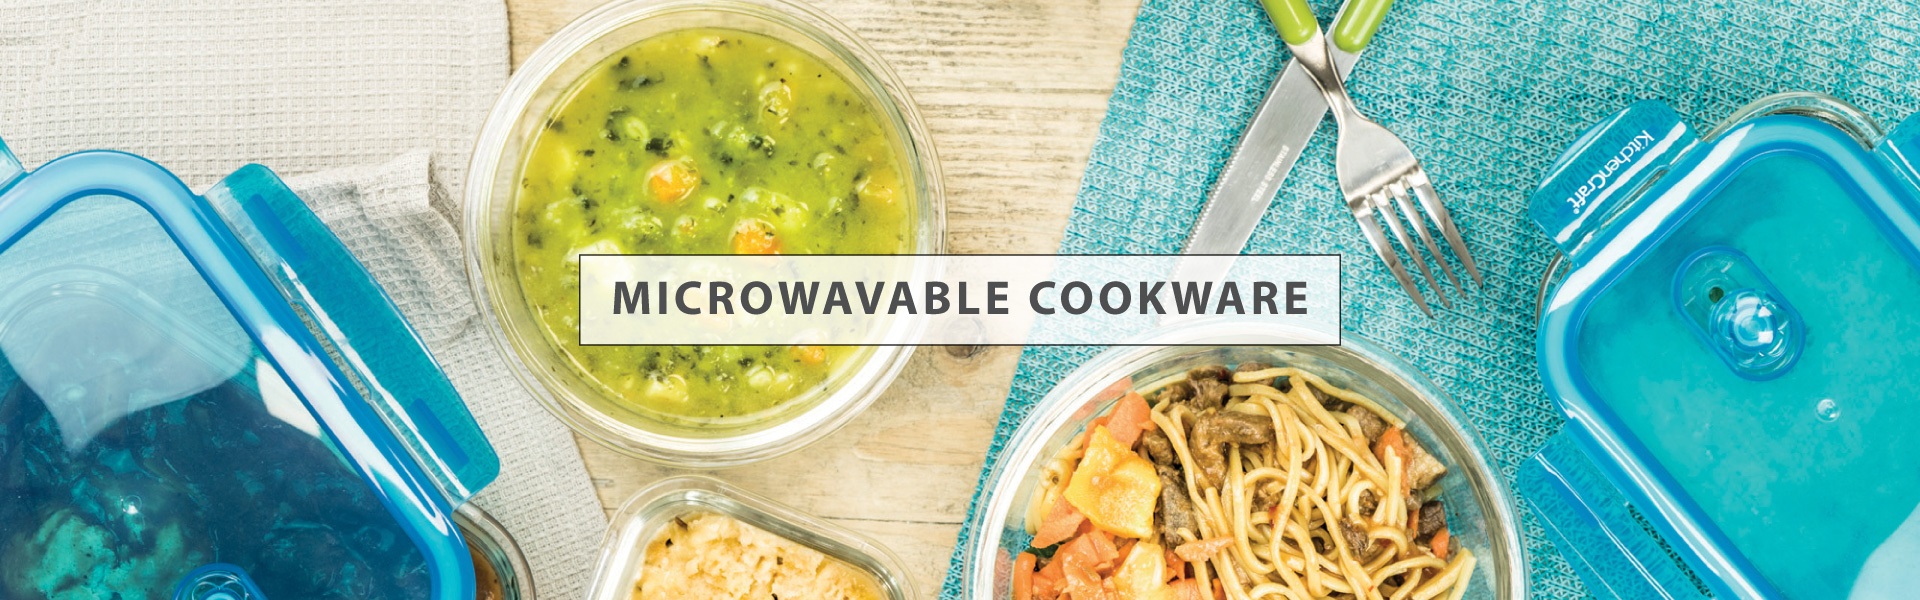 MICROWAVABLE COOKWARE